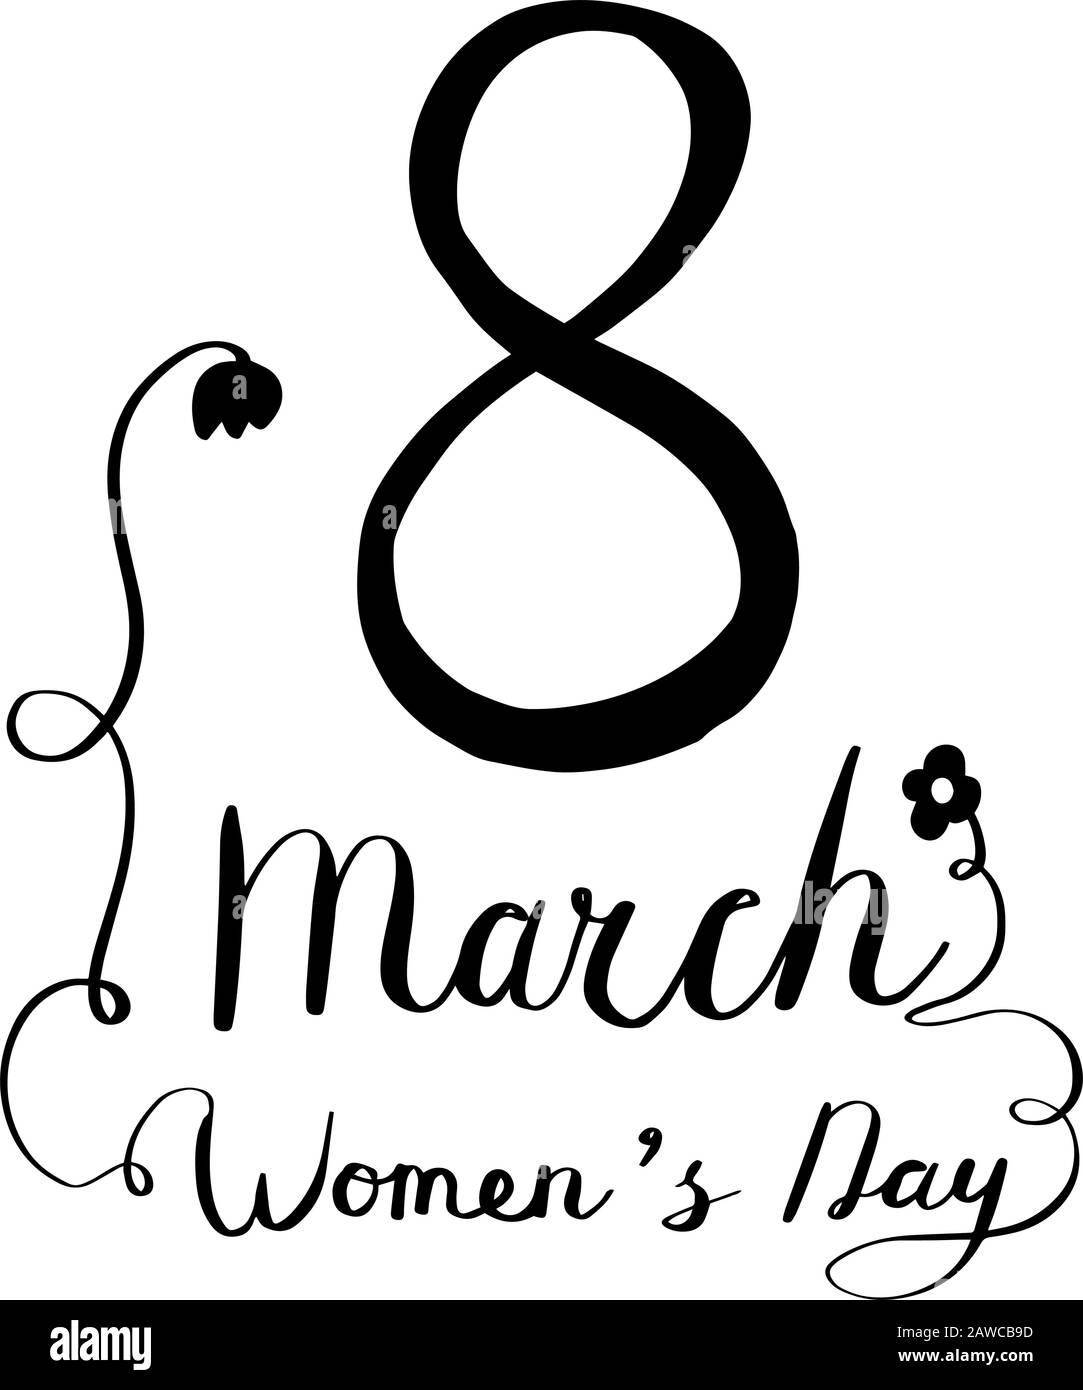 Happy womens day Black and White Stock Photos & Images - Alamy